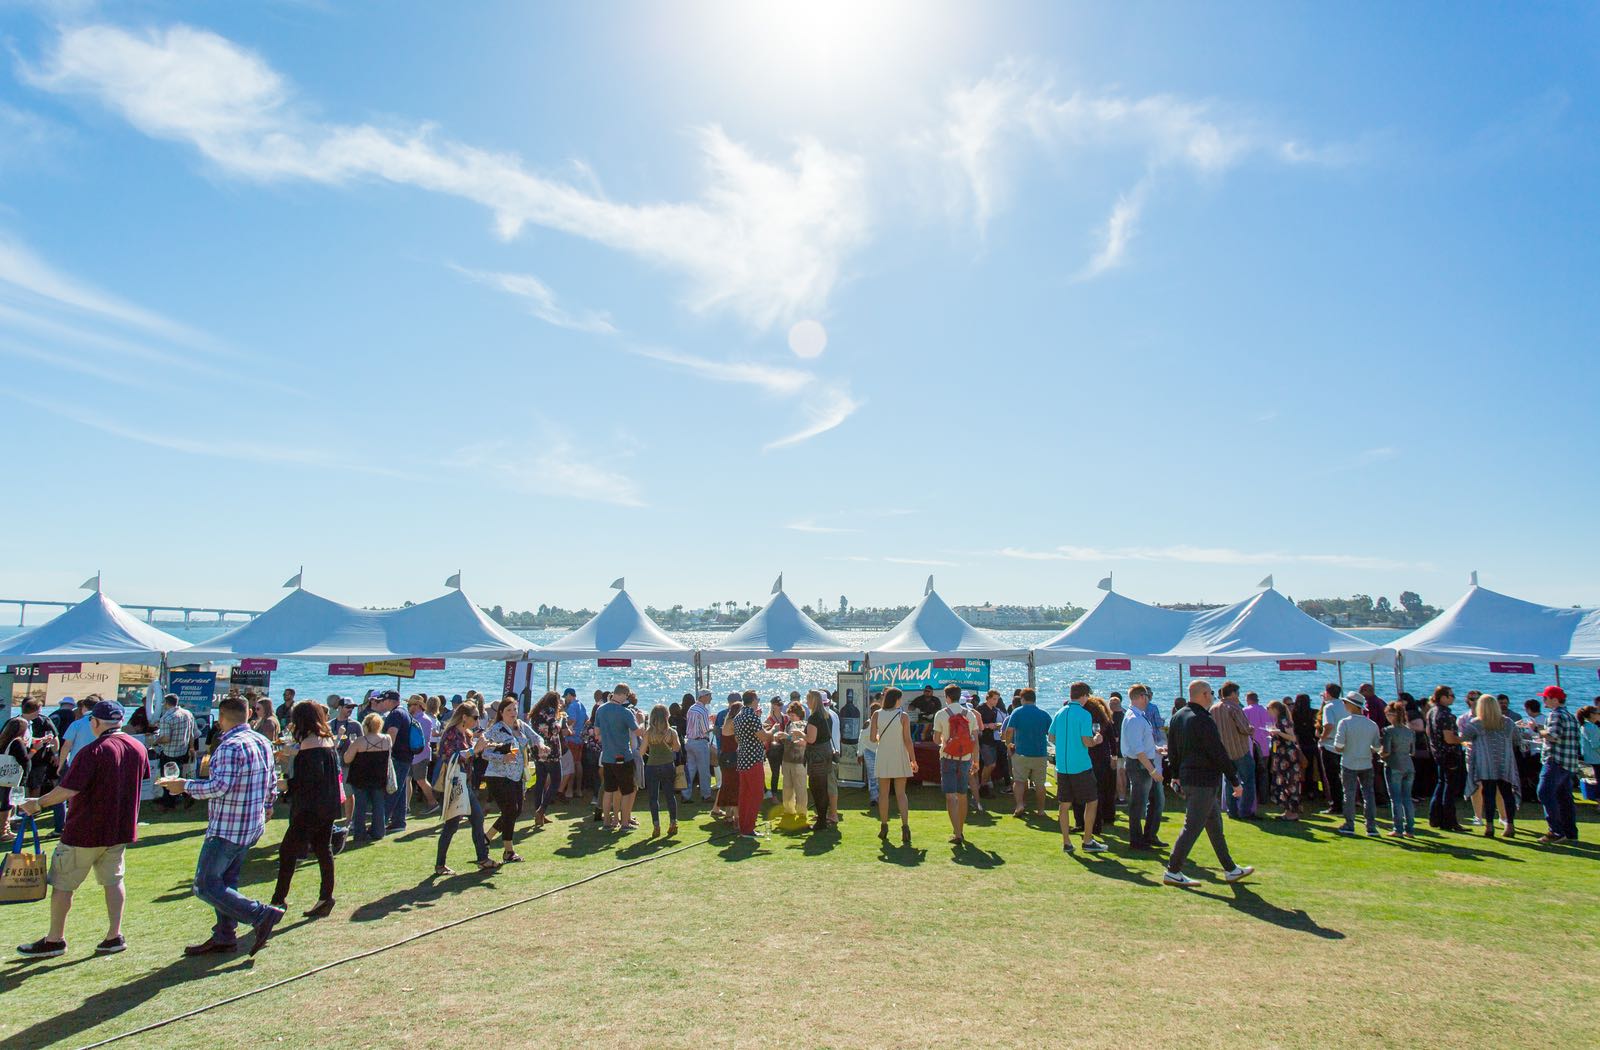 San Diego Bay Wine + Food Festival - Top Things to Do